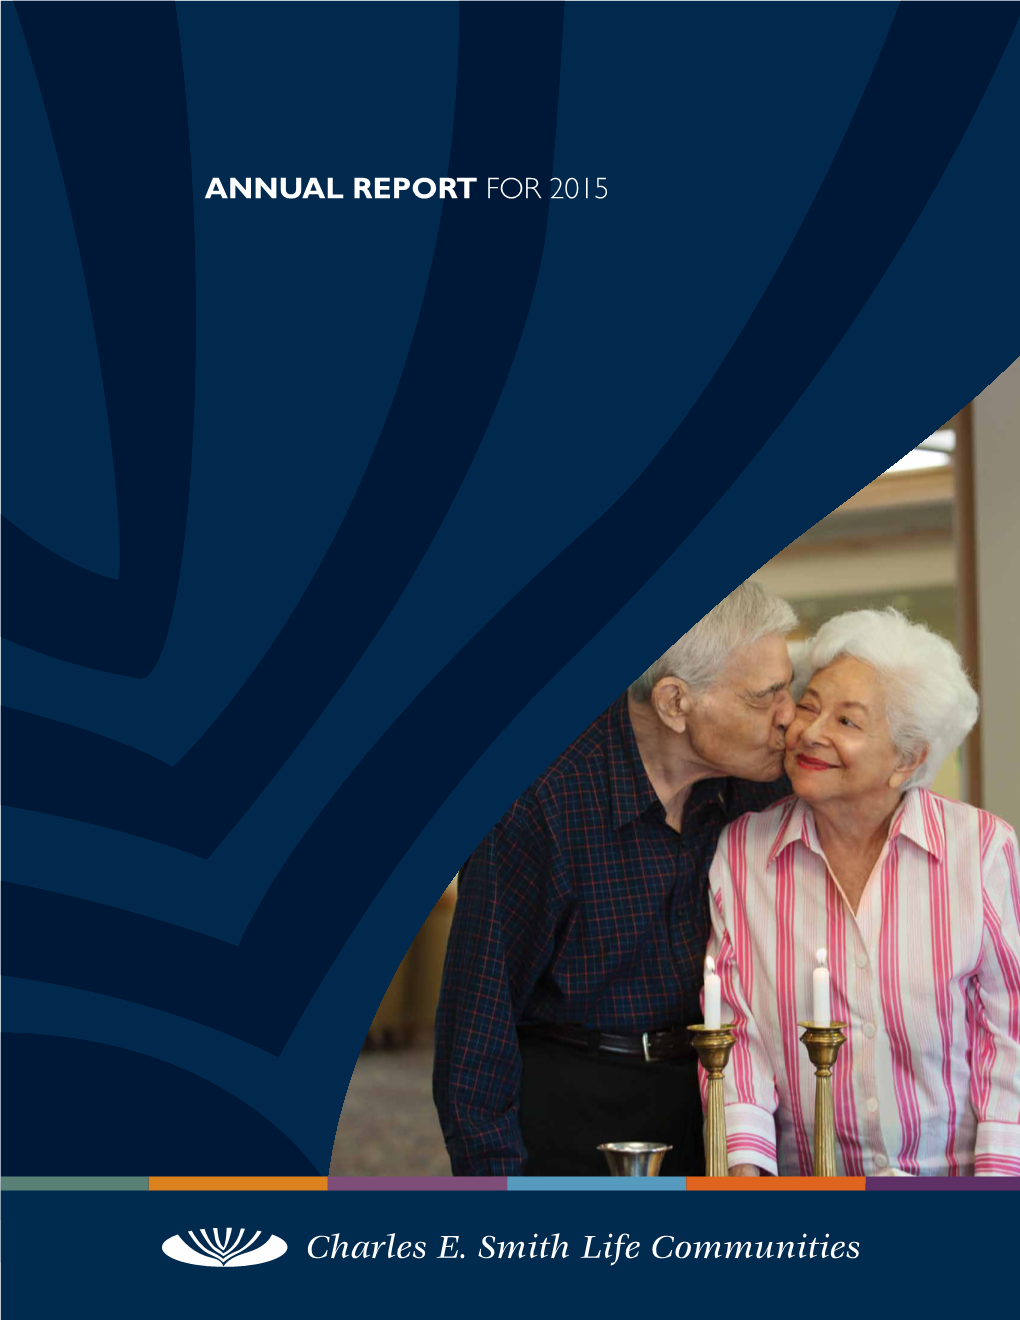 ANNUAL REPORT for 2015 the Mission of Charles E